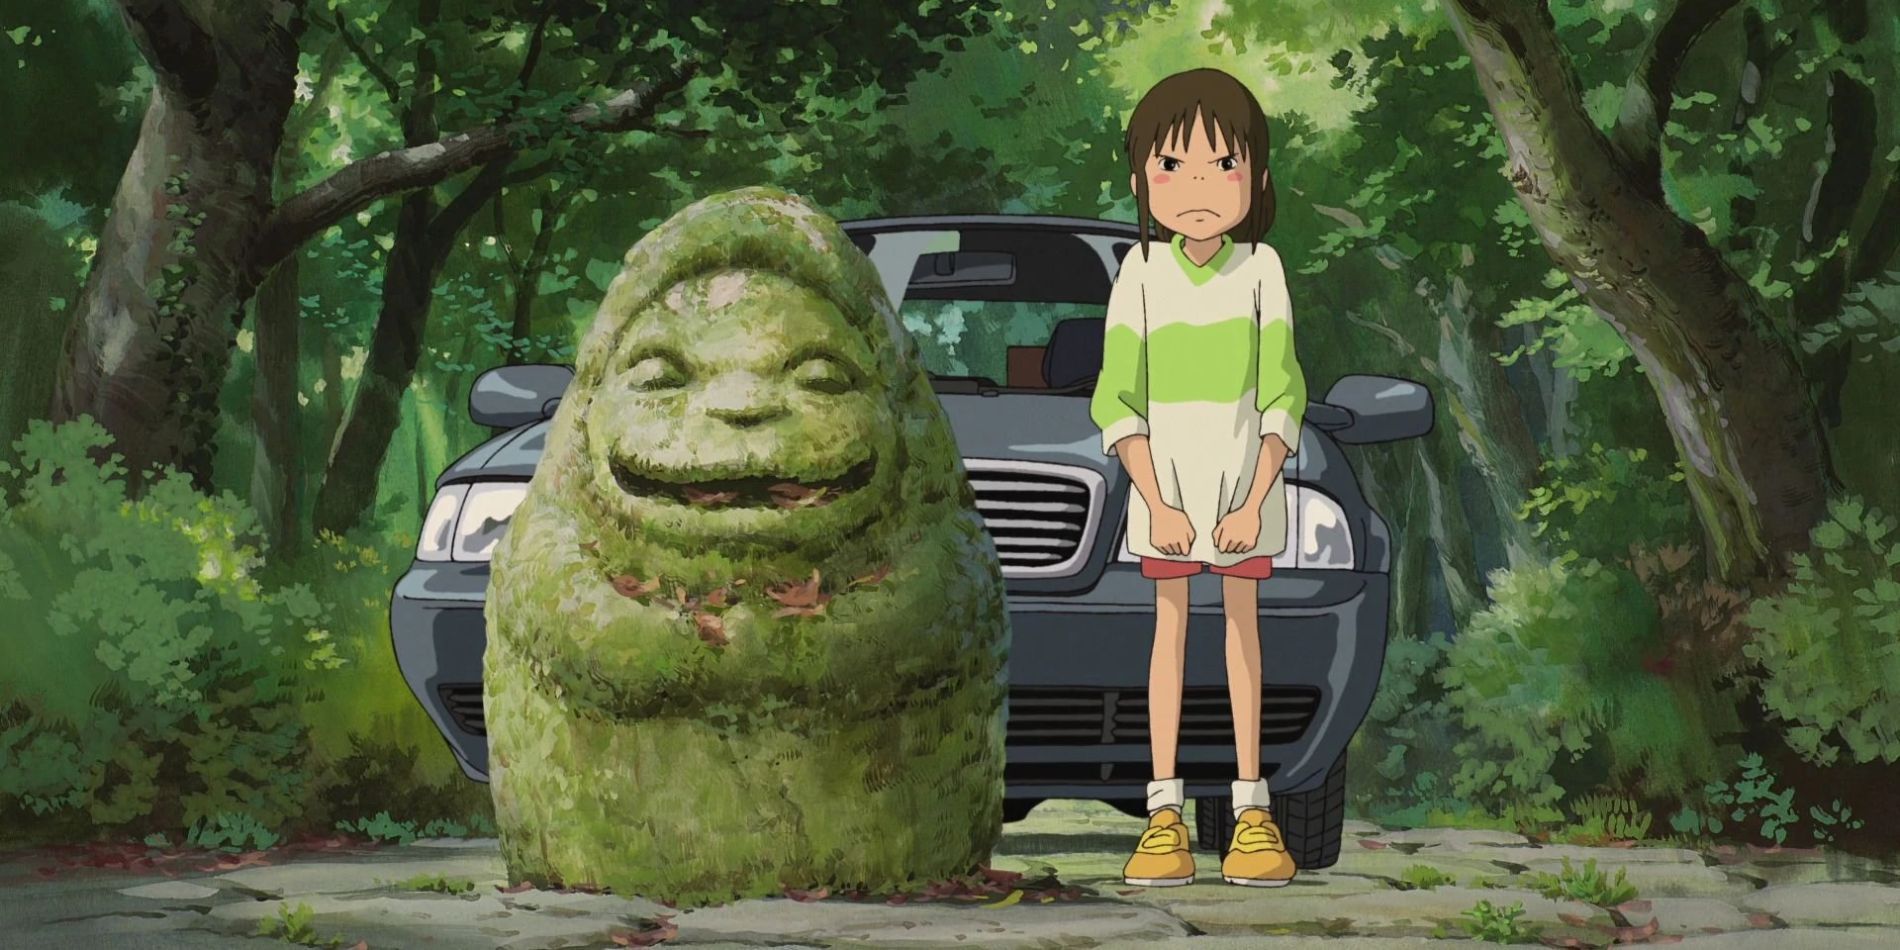 Chihiro standing next to a statue looking angry at the beginning of Spirited Away.